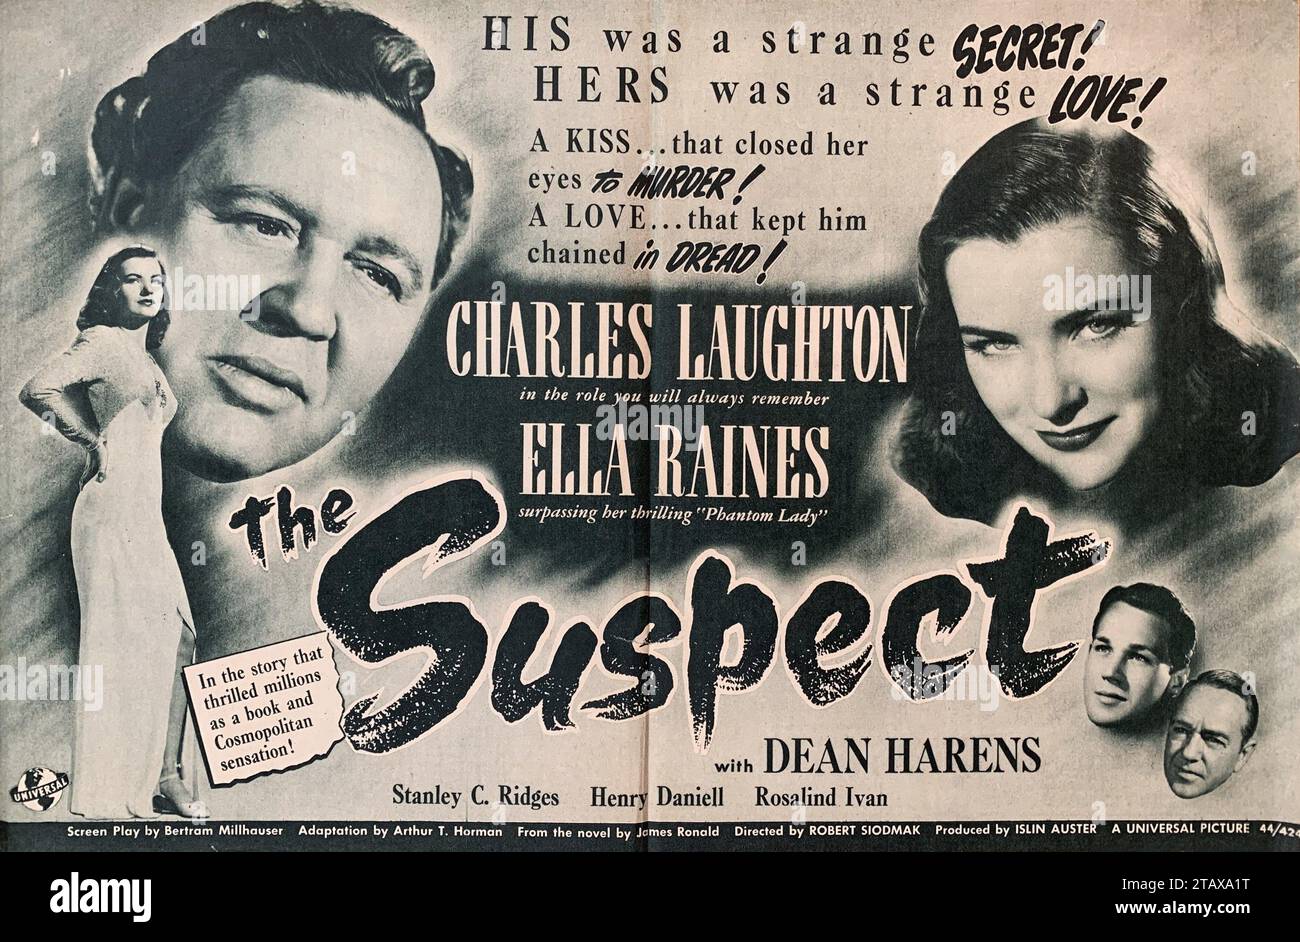 CHARLES LAUGHTON ELLA RAINES DEAN HARENS and STANLEY RIDGES in THE SUSPECT 1944 director ROBERT SIODMAK novel James Ronald music Frank Skinner gowns Vera West Universal Pictures Stock Photo